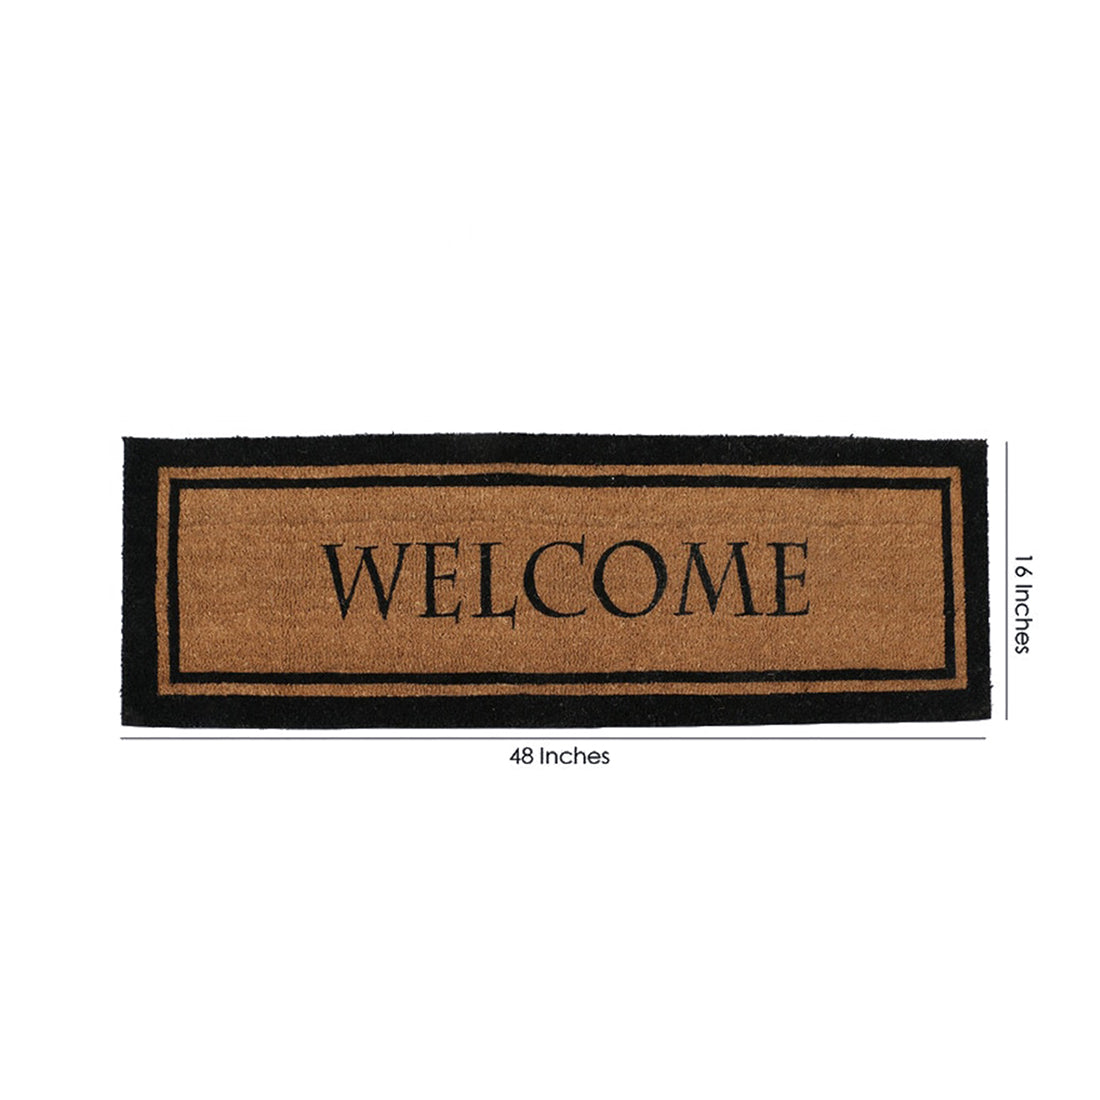 SWHF Extra Large Premium Coir and Rubber Quirky Design Door and Floor Mat : Welcome